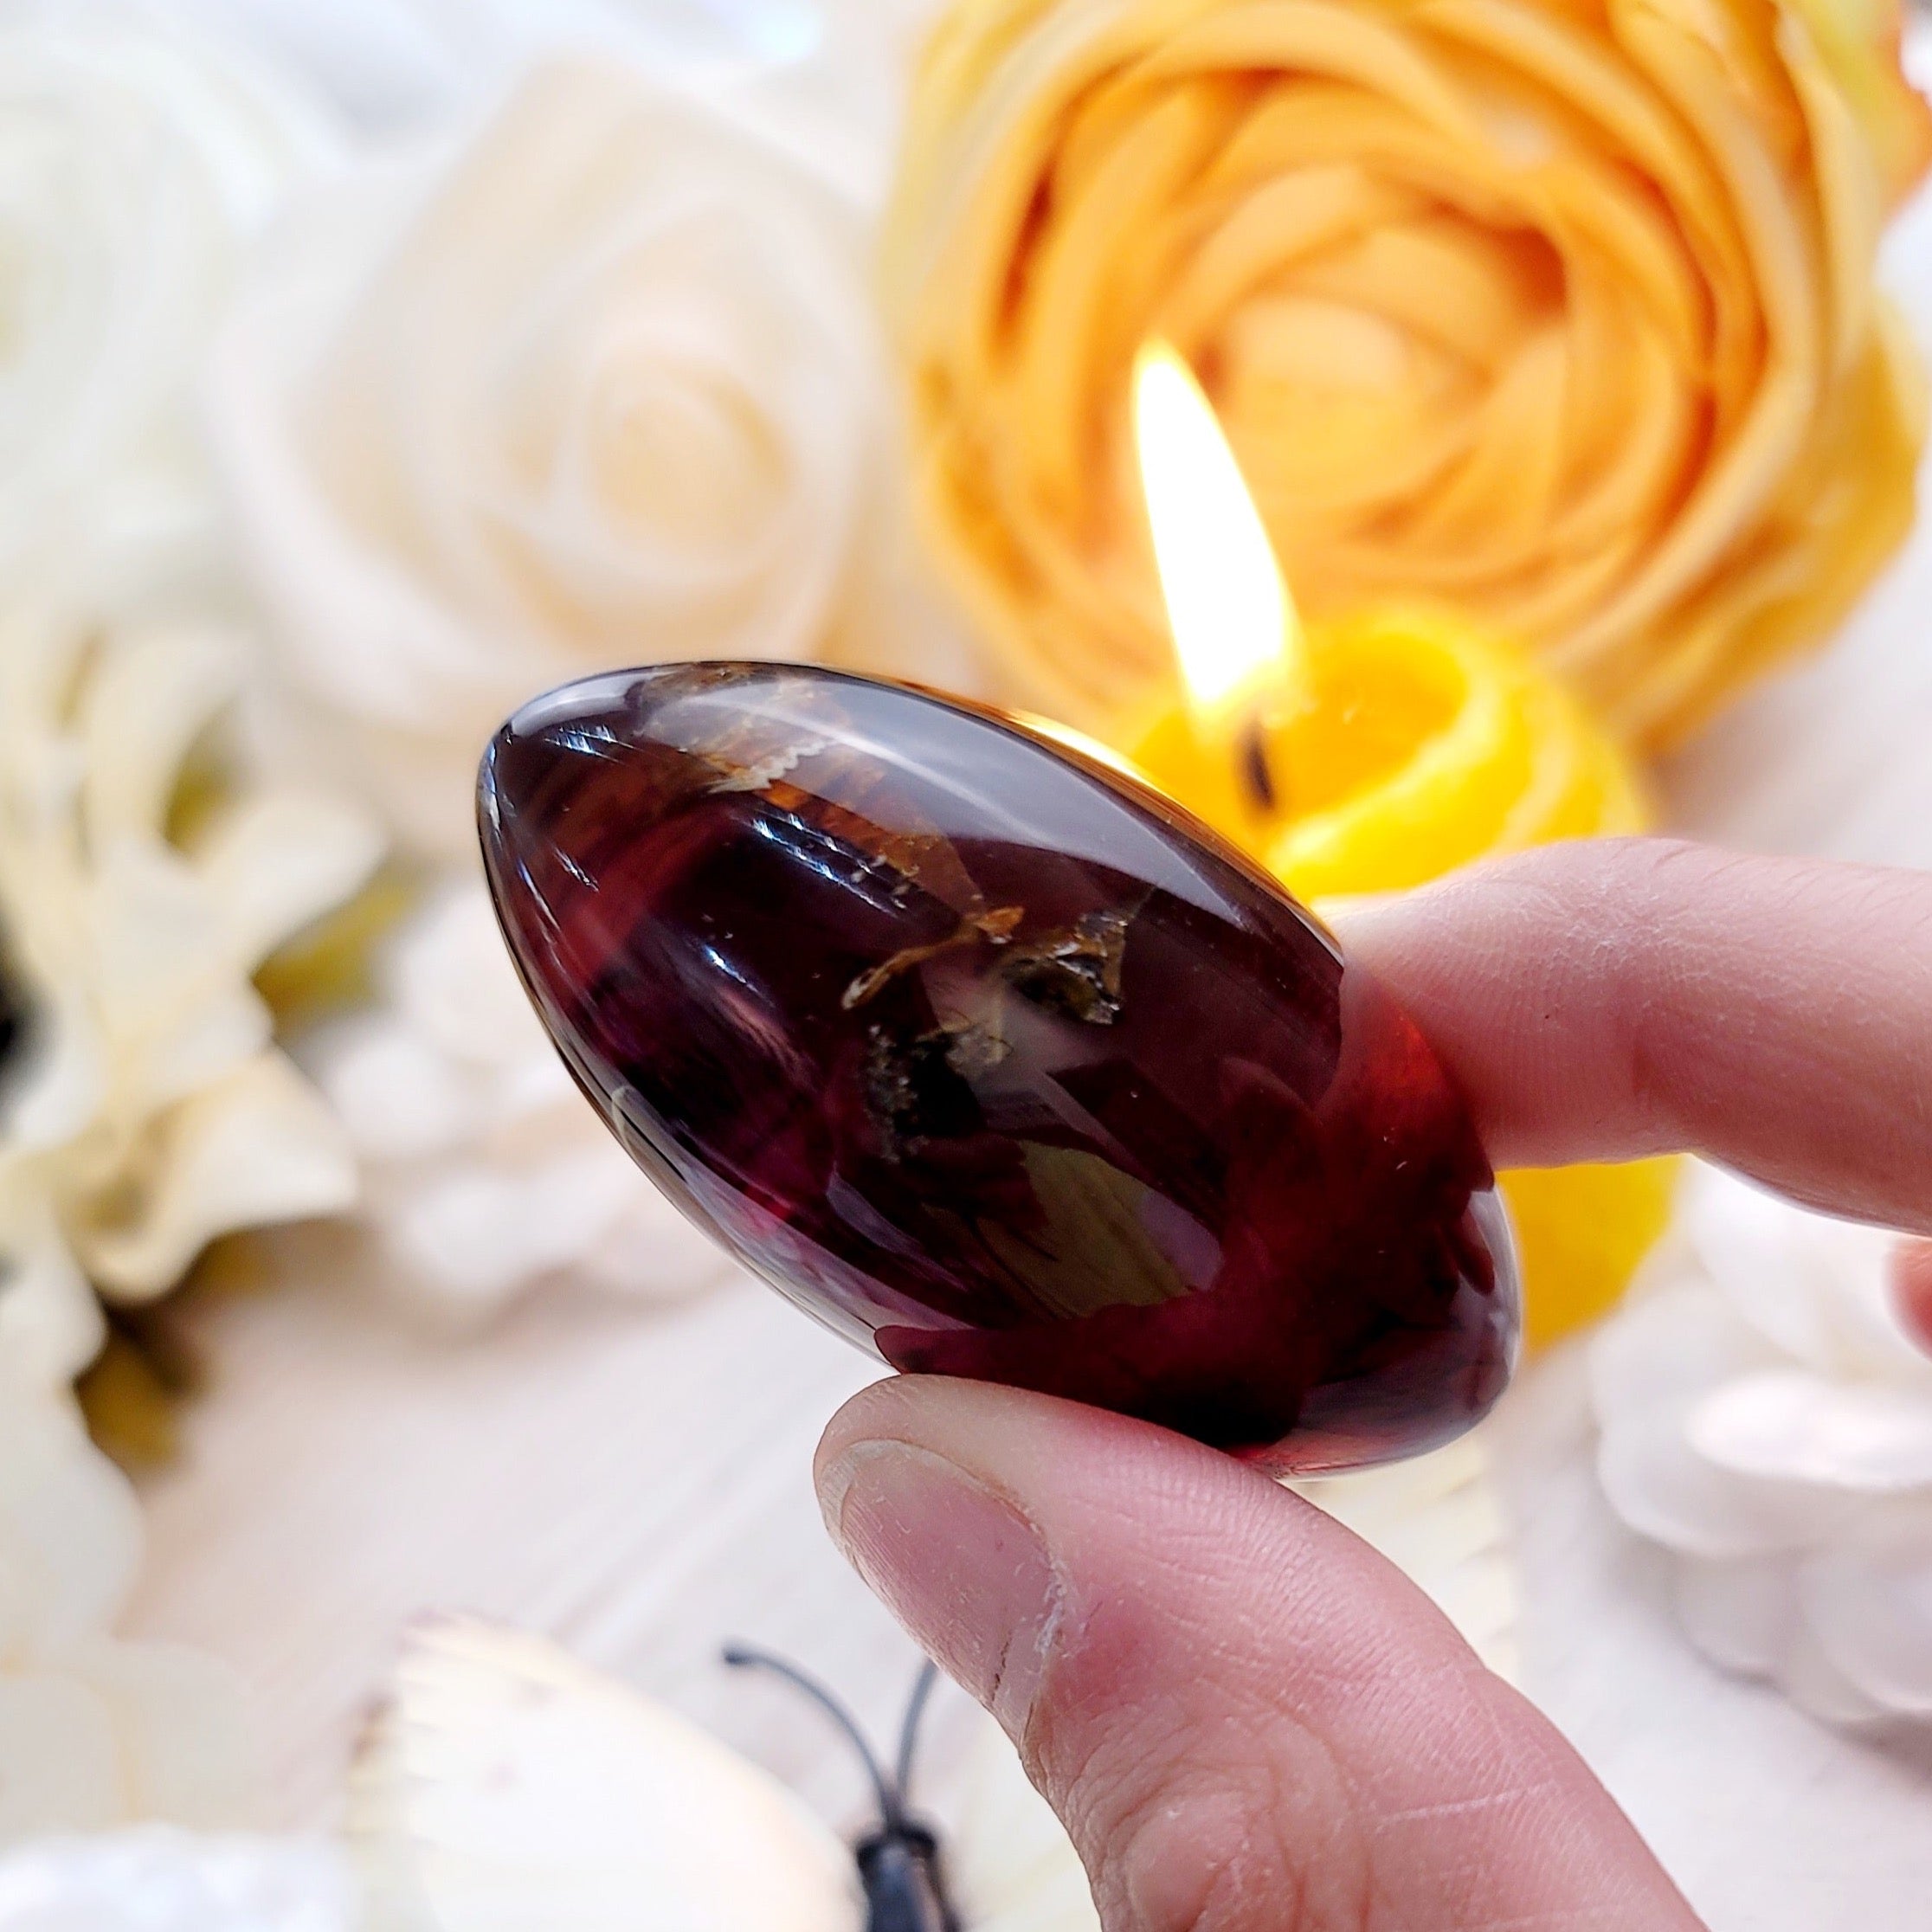 Amber Shiva for Healing, Joy and Protection